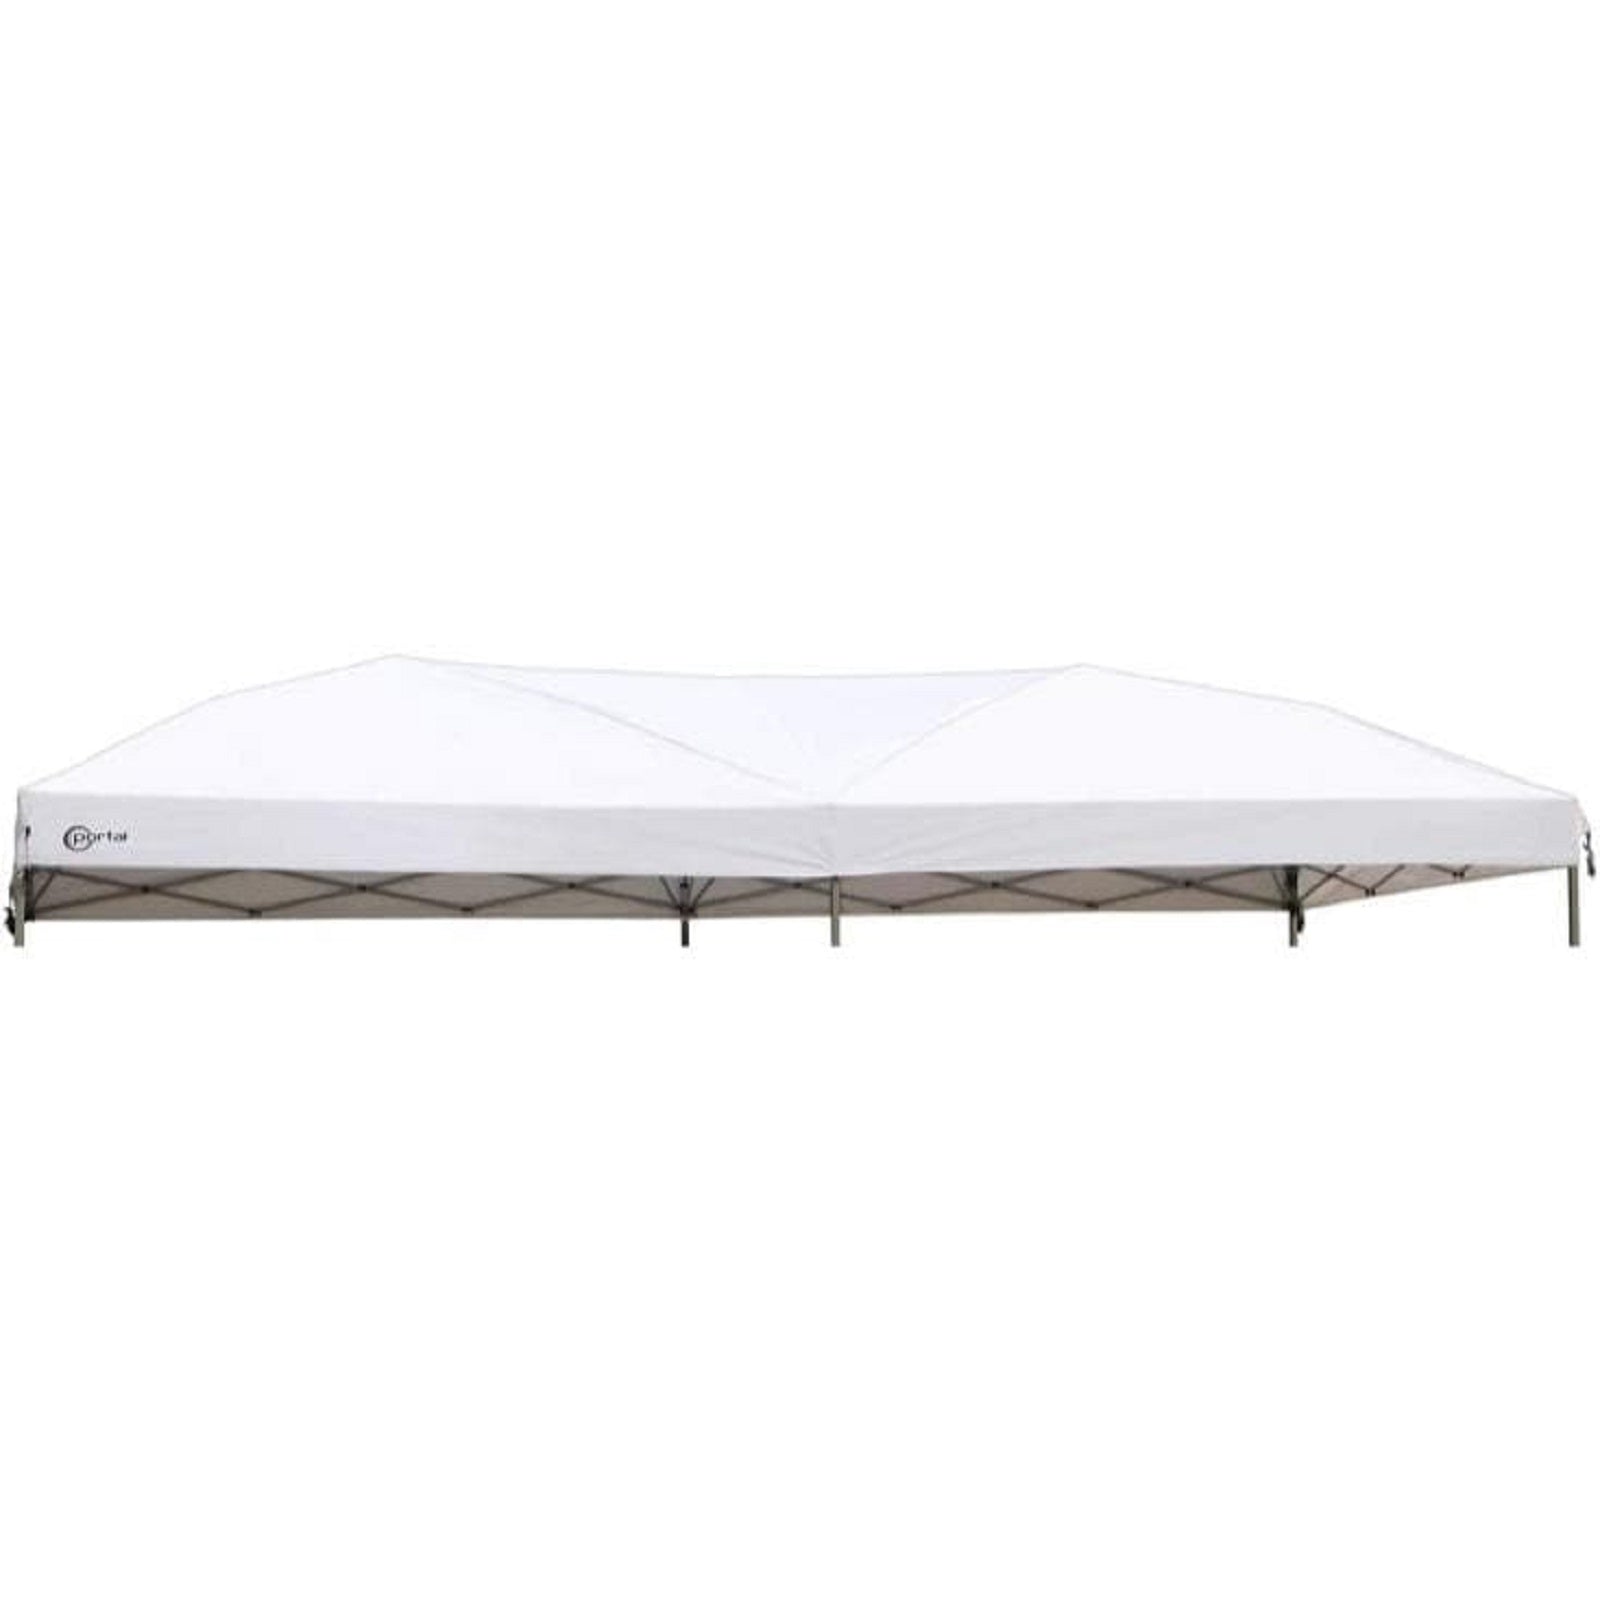 Portal Outdoors Canopy Top Cover